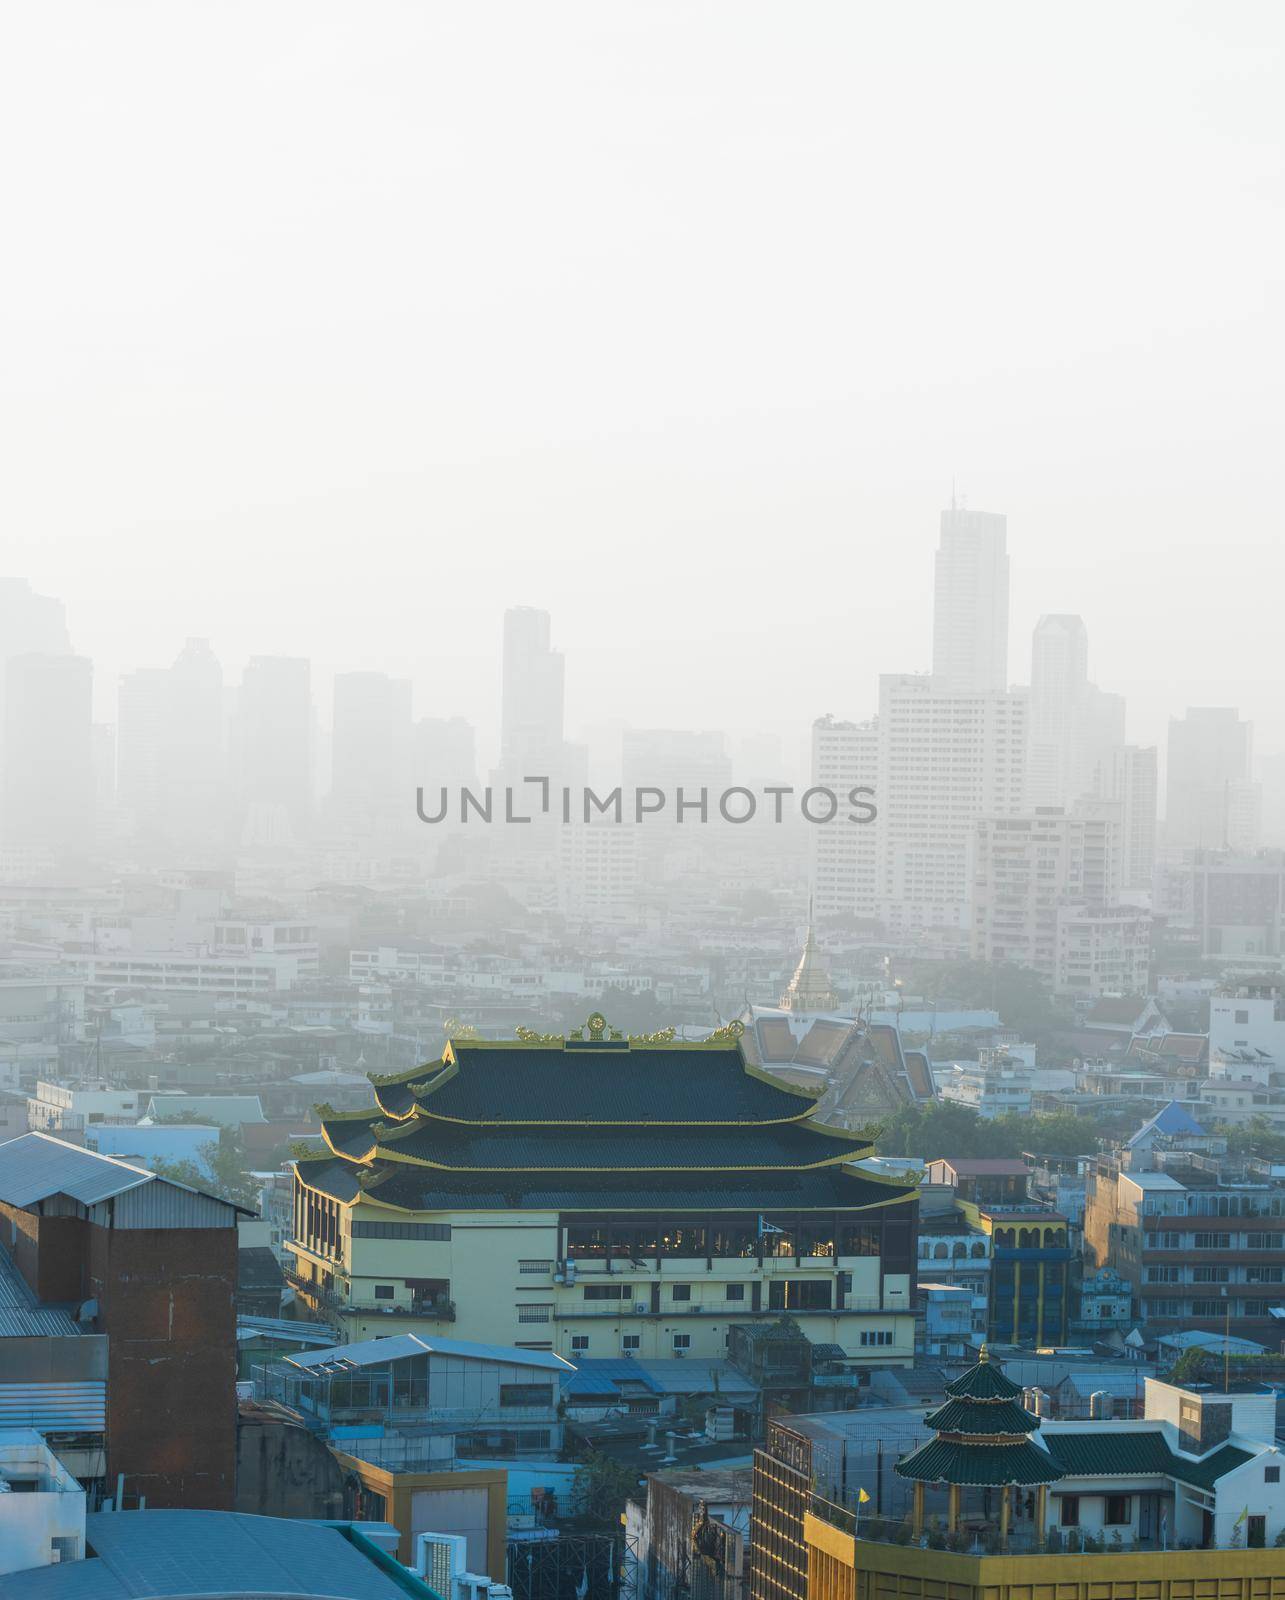 Downtown skyscrapers of the city of Bankok. Poor visibility, smog, caused by dust and smoke high level PM2.5  air pollution. by toa55